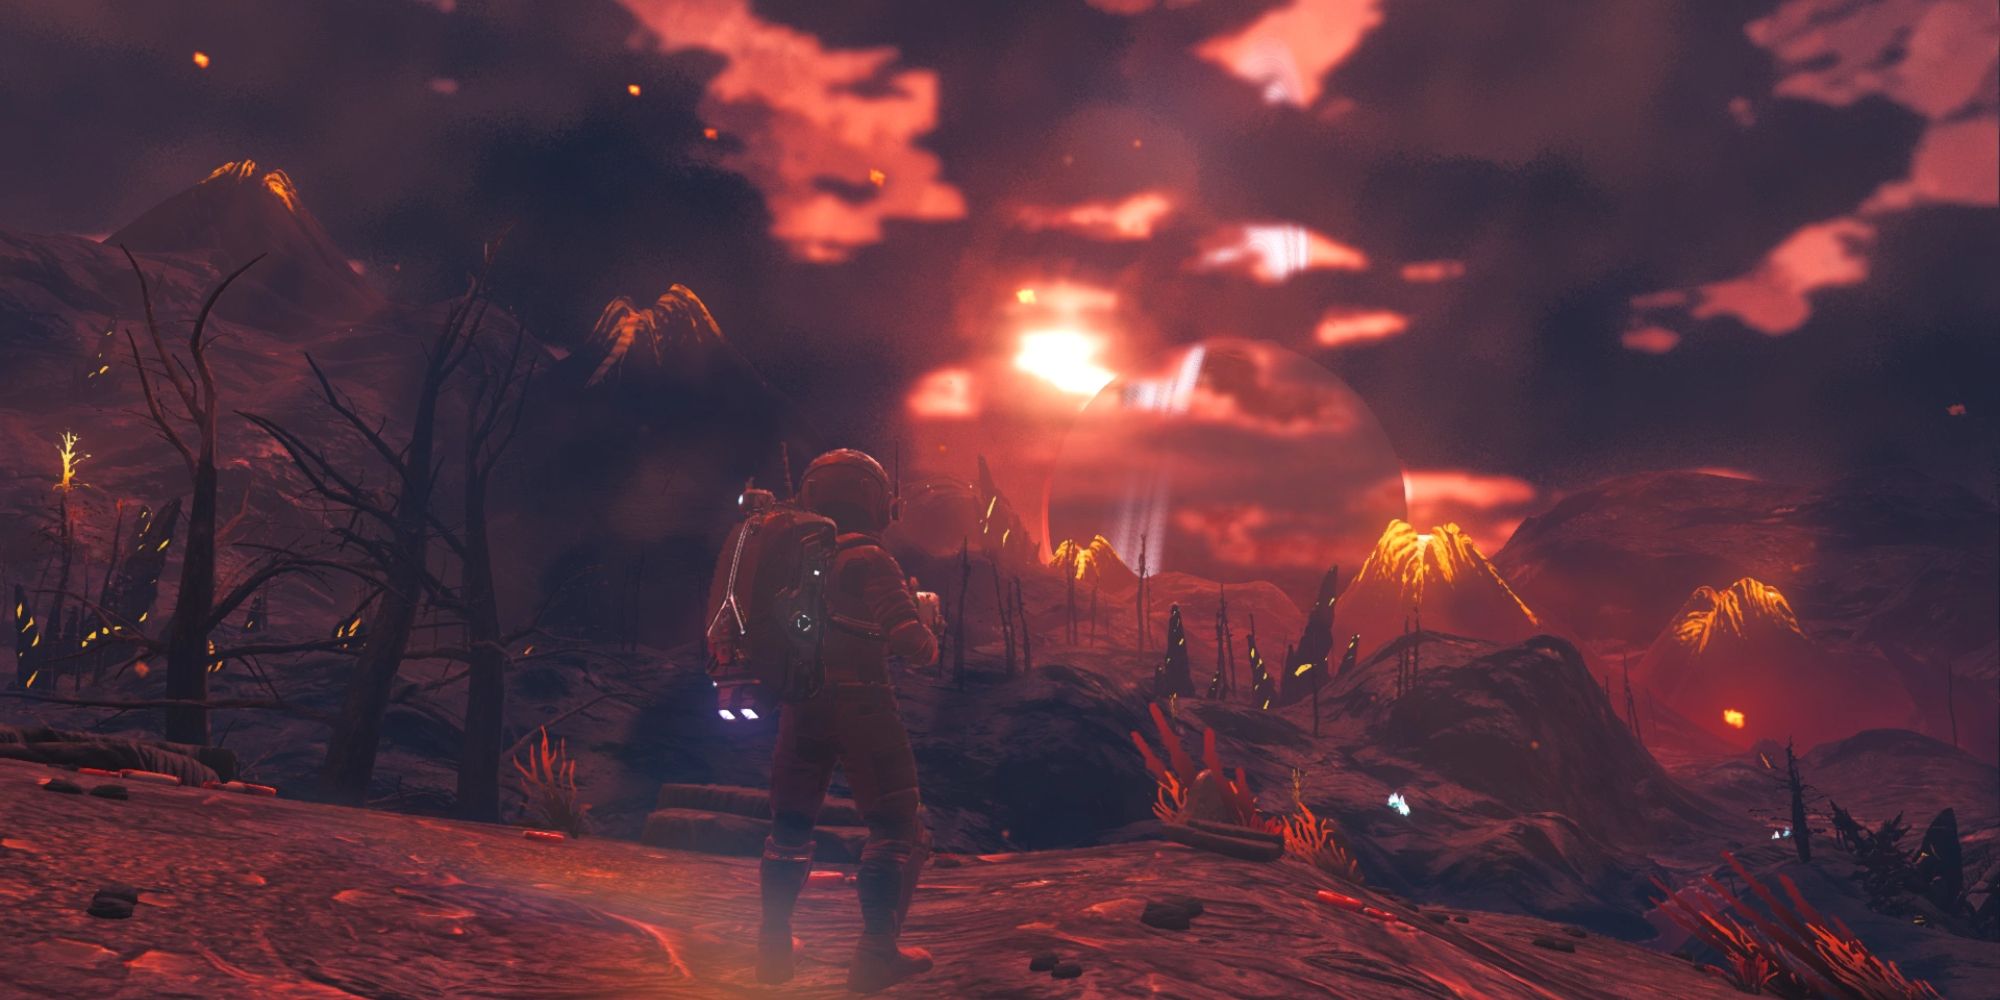 A photo of a Volcanic planet from No Man's Sky, featuring a red landscape with mountains that spew lava.